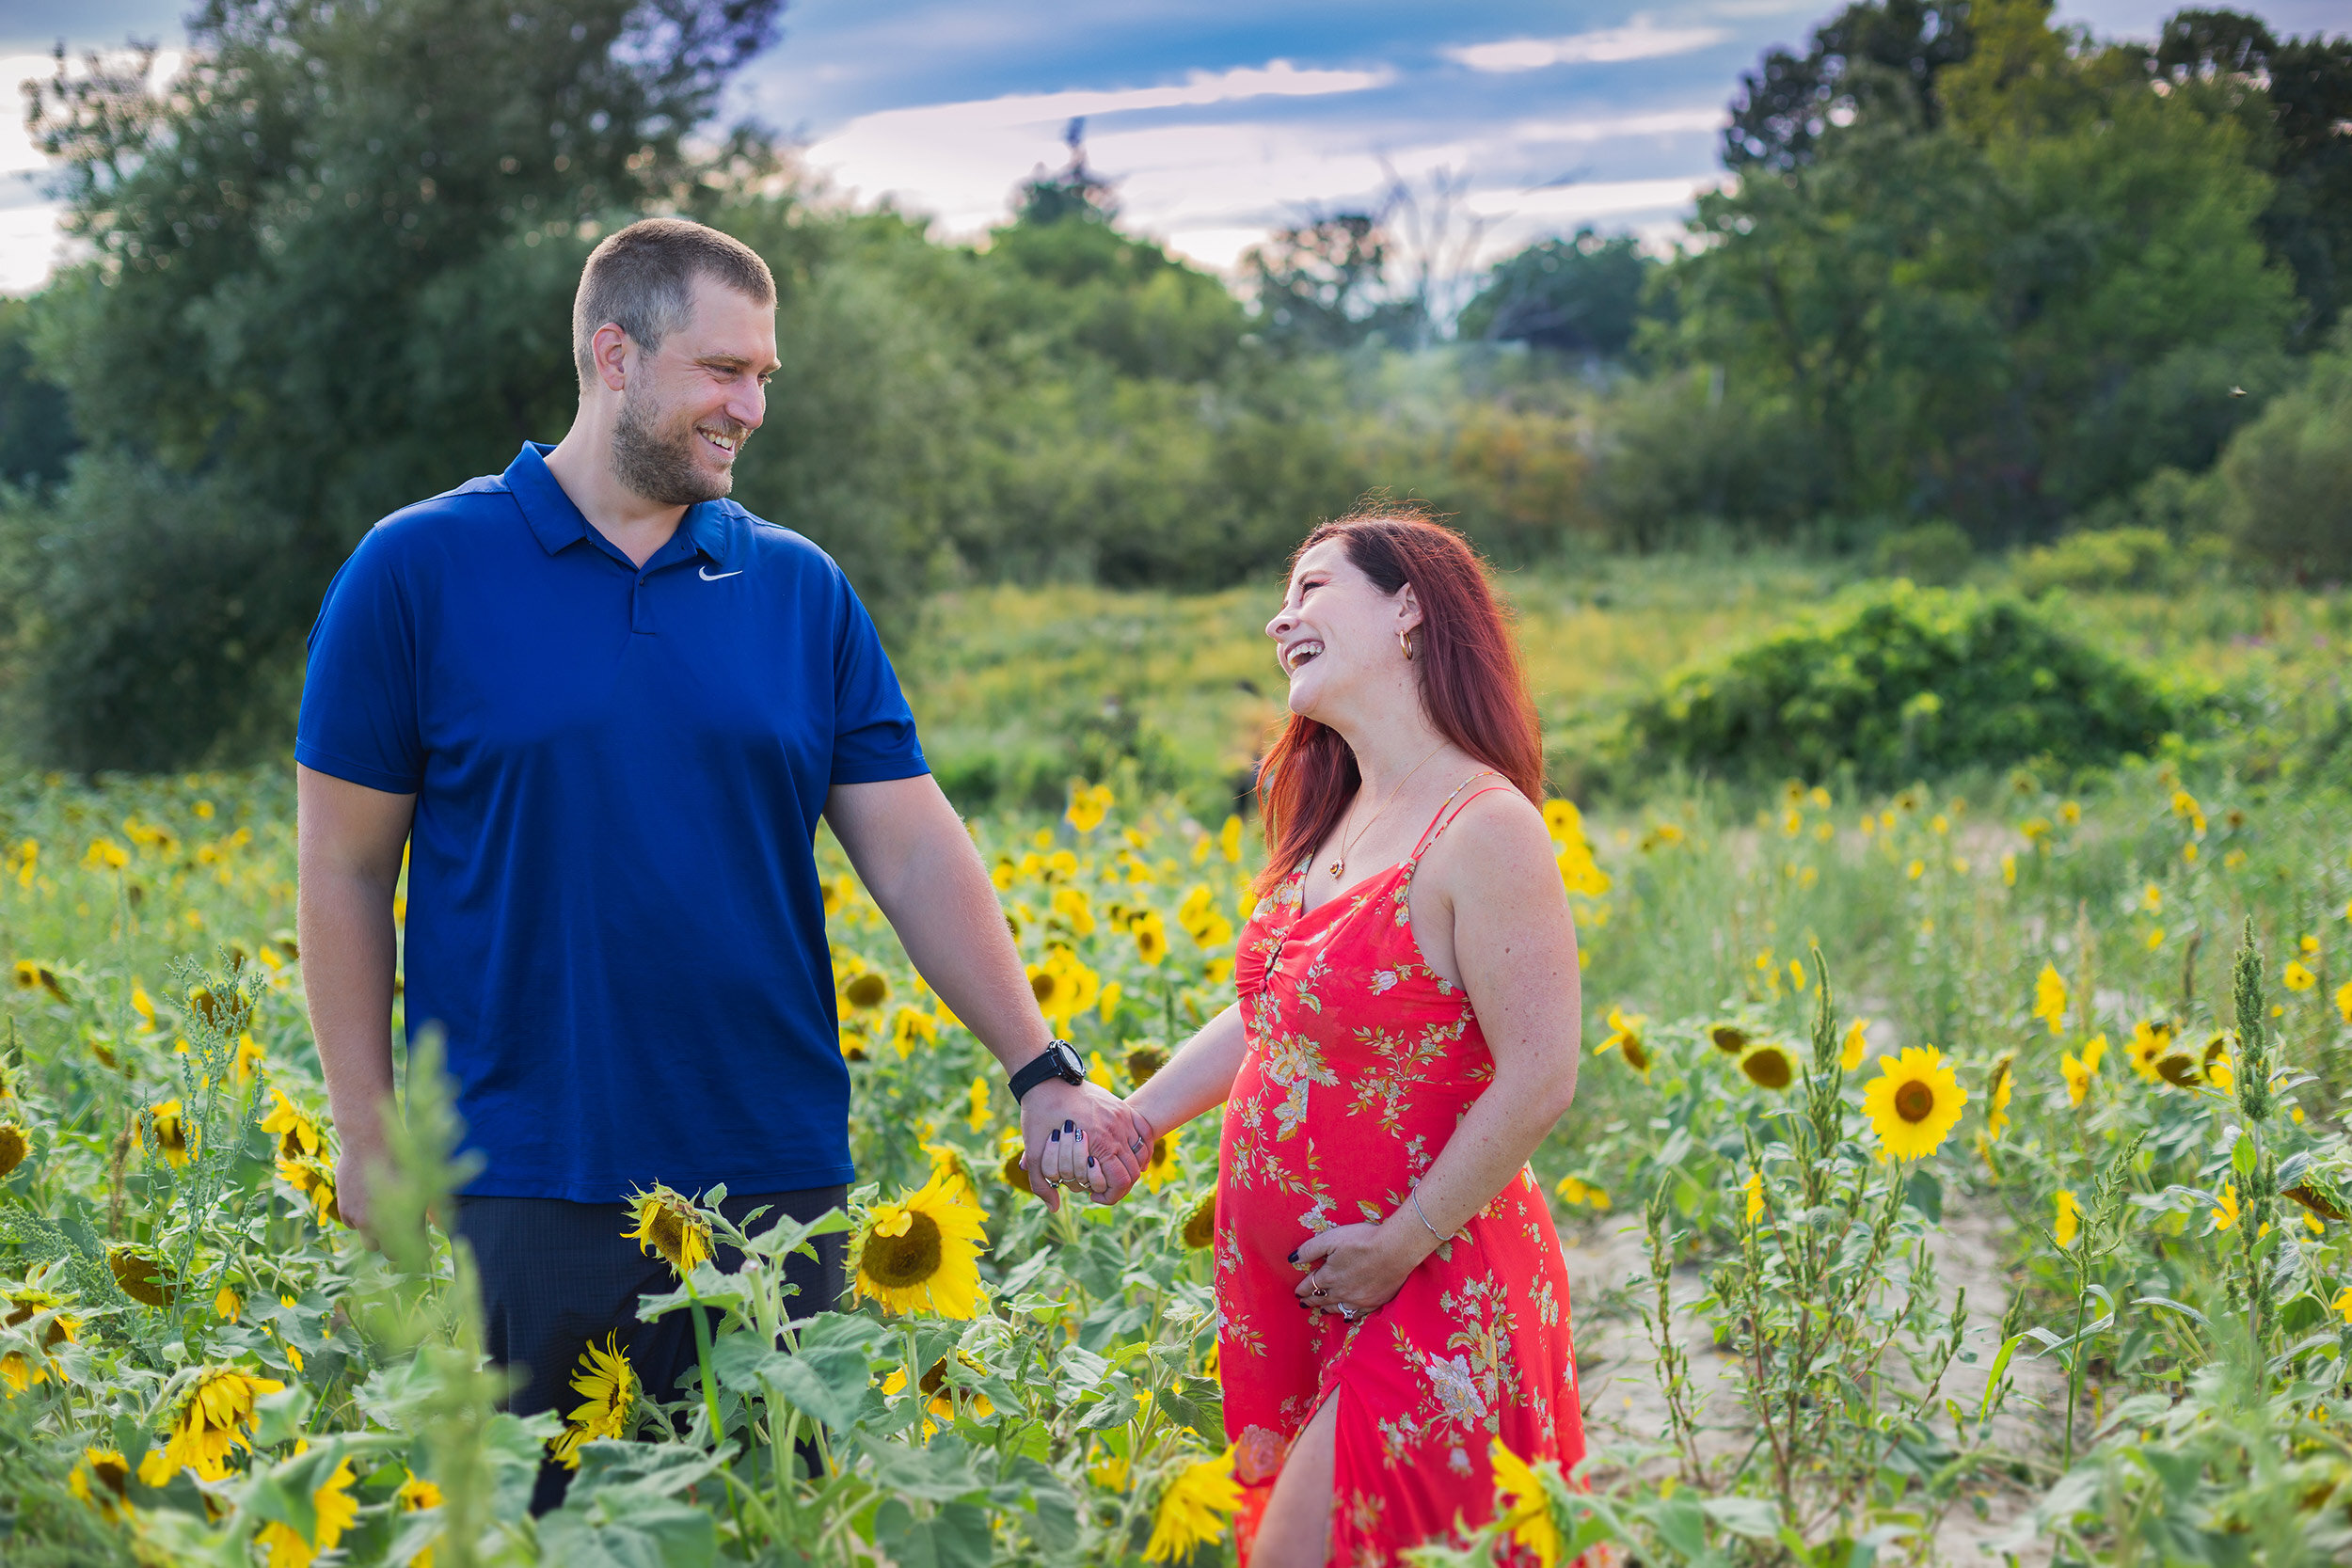 Colby Farm Sunflower Maternity Portrait Session | Stephen Grant Photography